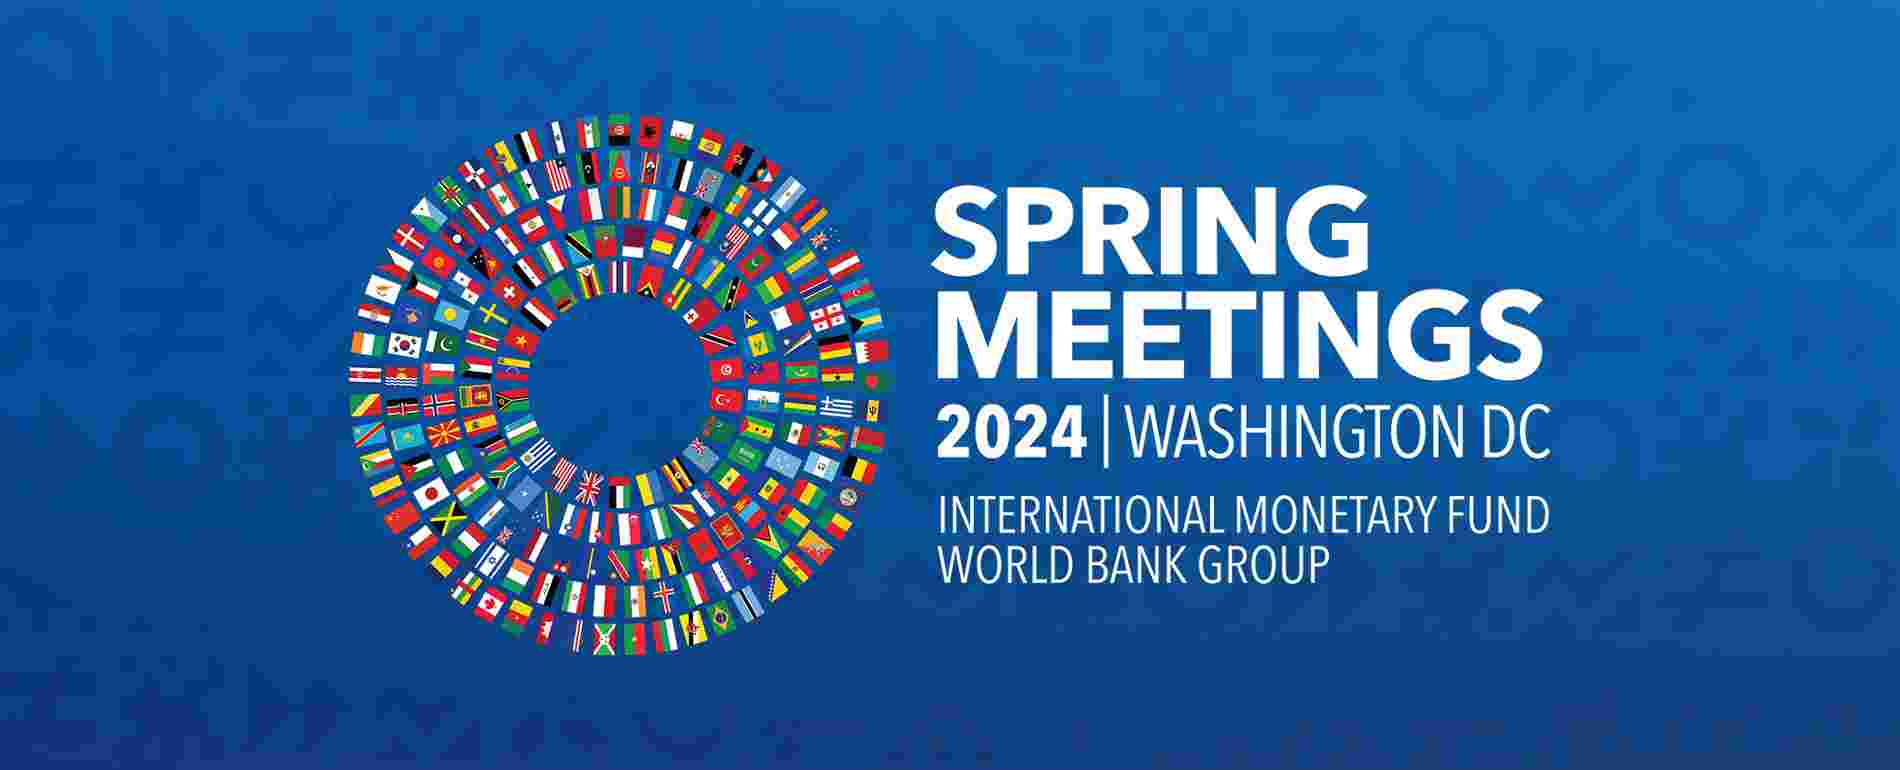 Natia Turnava to Participate in Spring Meetings of the International Monetary Fund and the World Bank